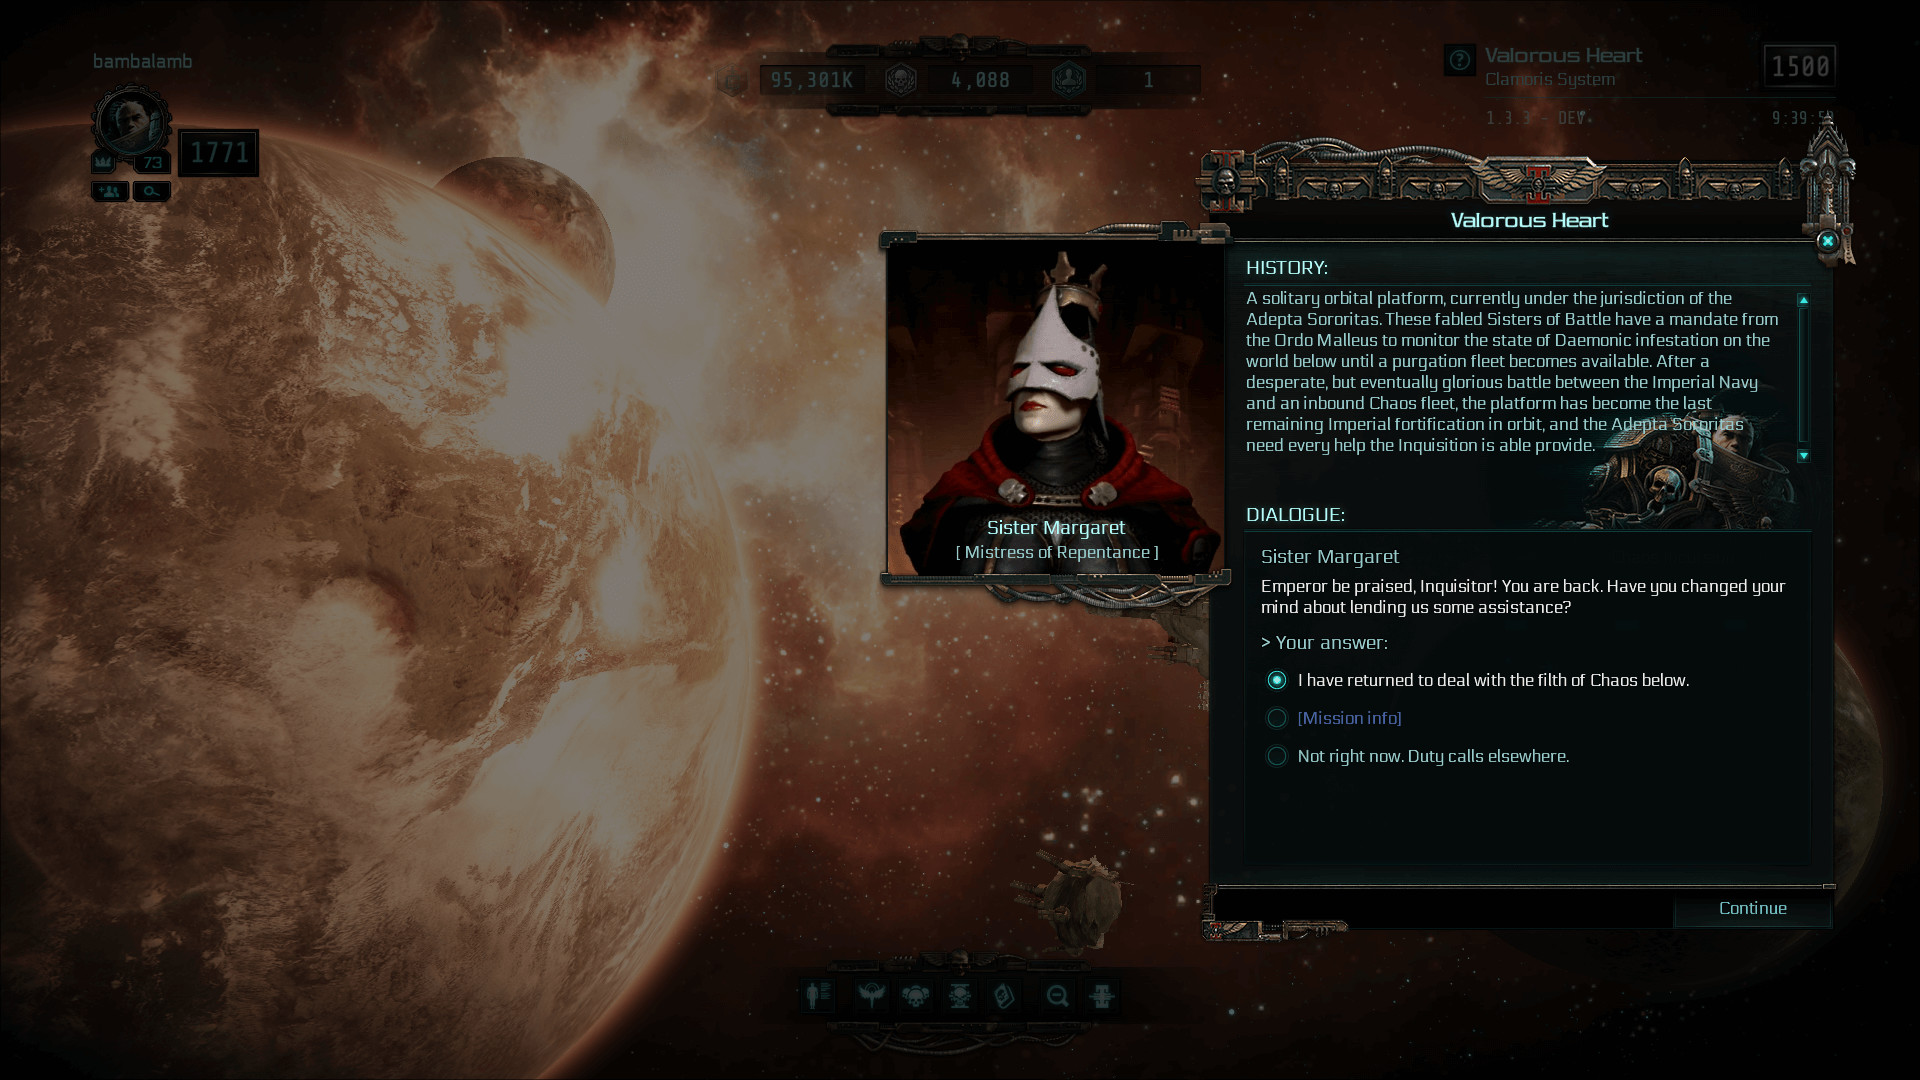 Warhammer 40,000: Inquisitor - Martyr - Maelstrom of Carnage Featured Screenshot #1